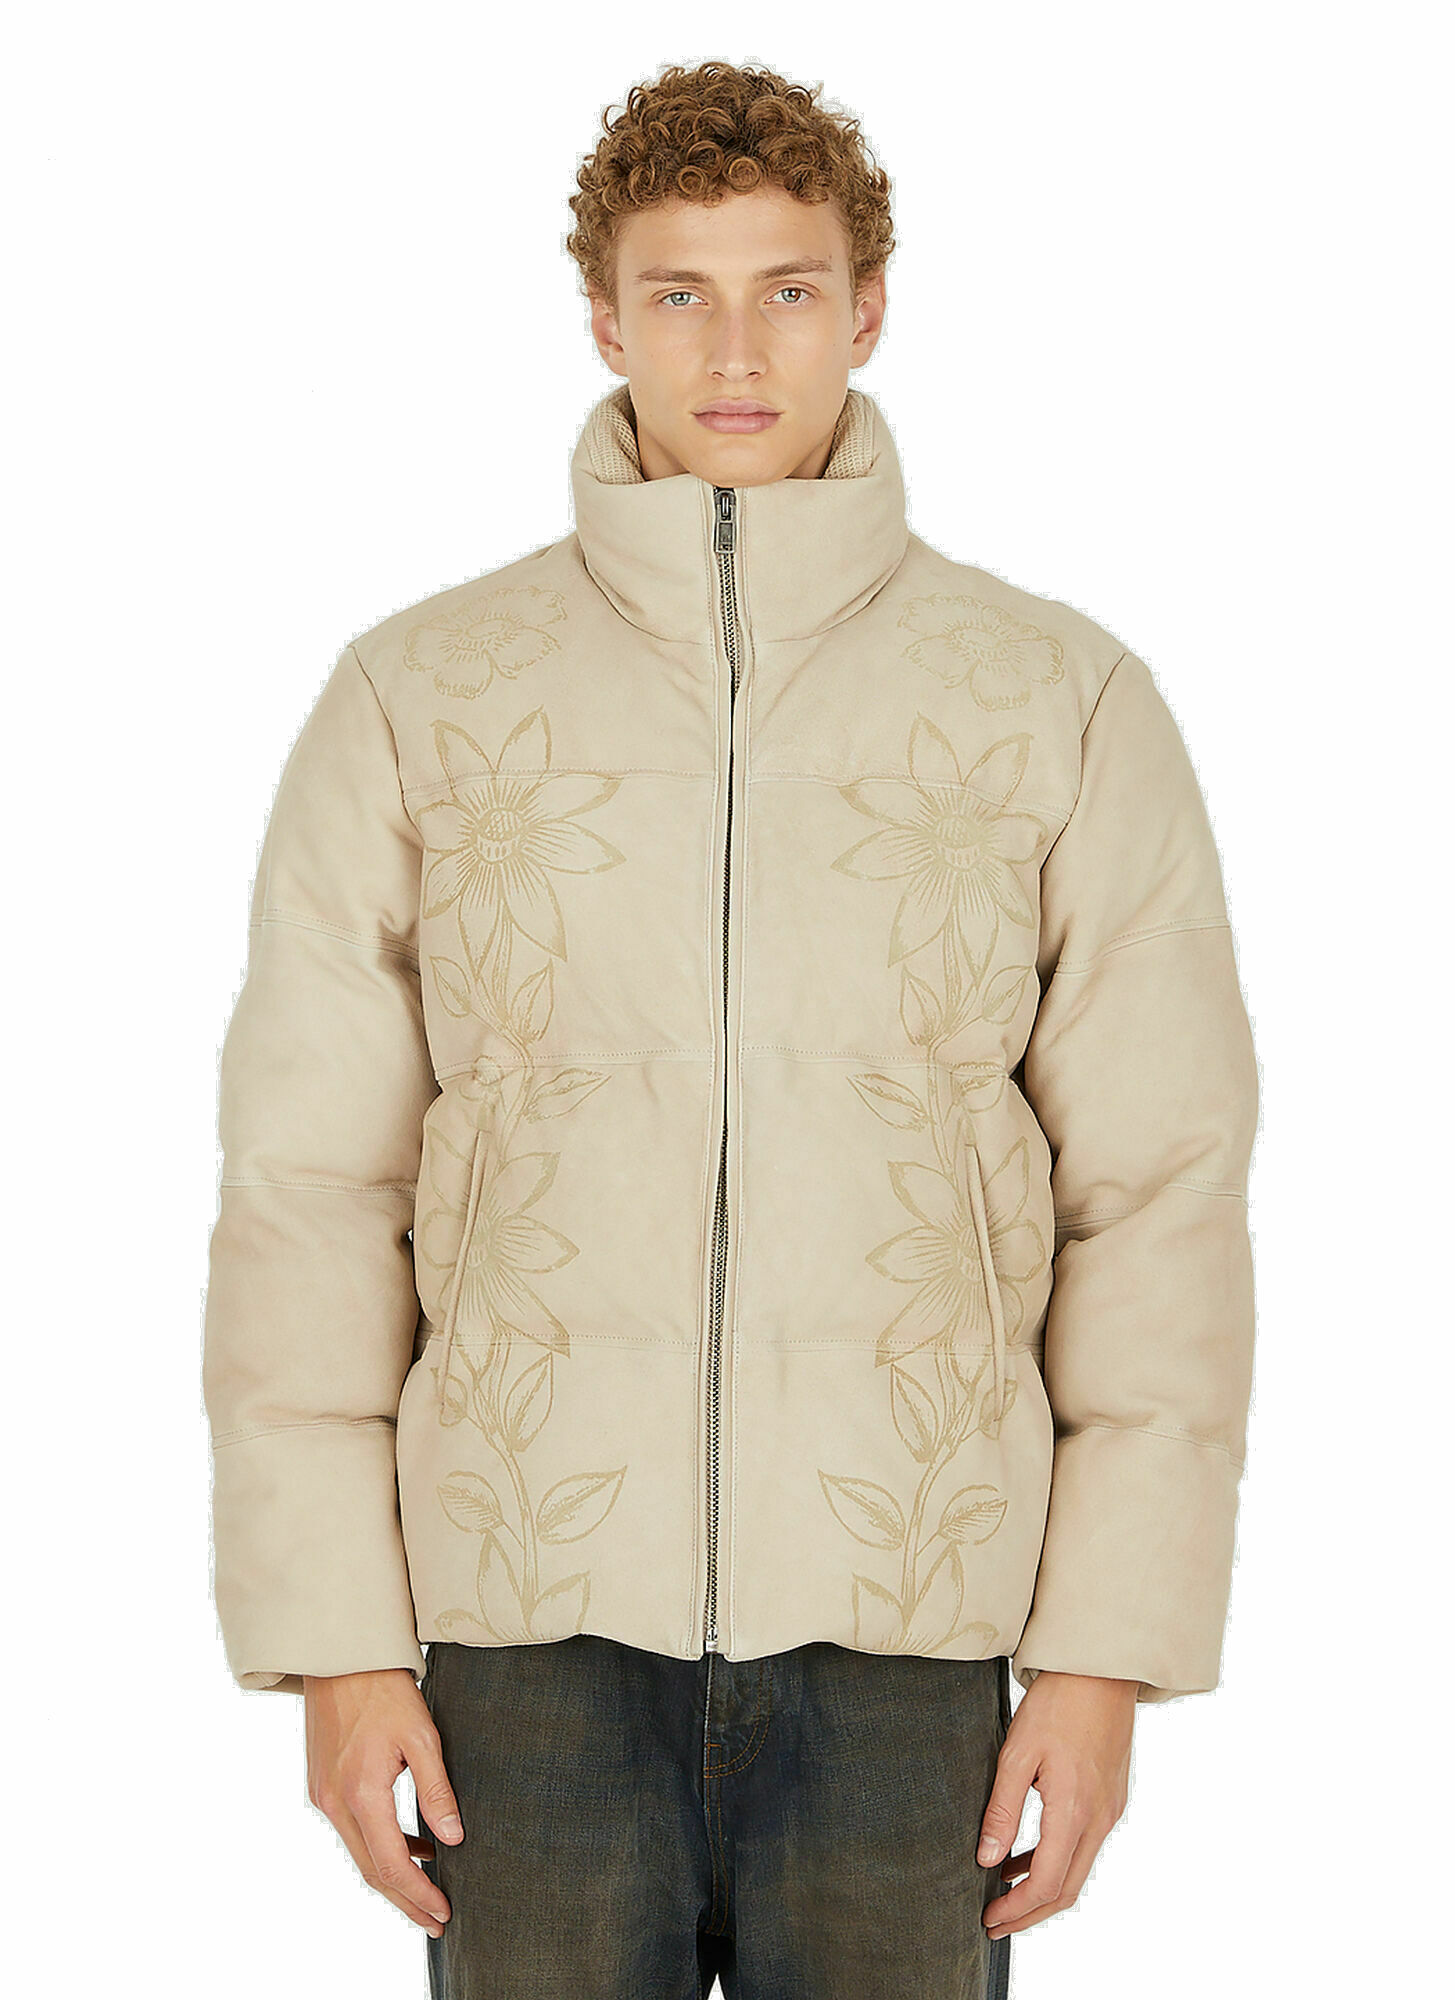 Photo: Floral Puffer Jacket in Beige